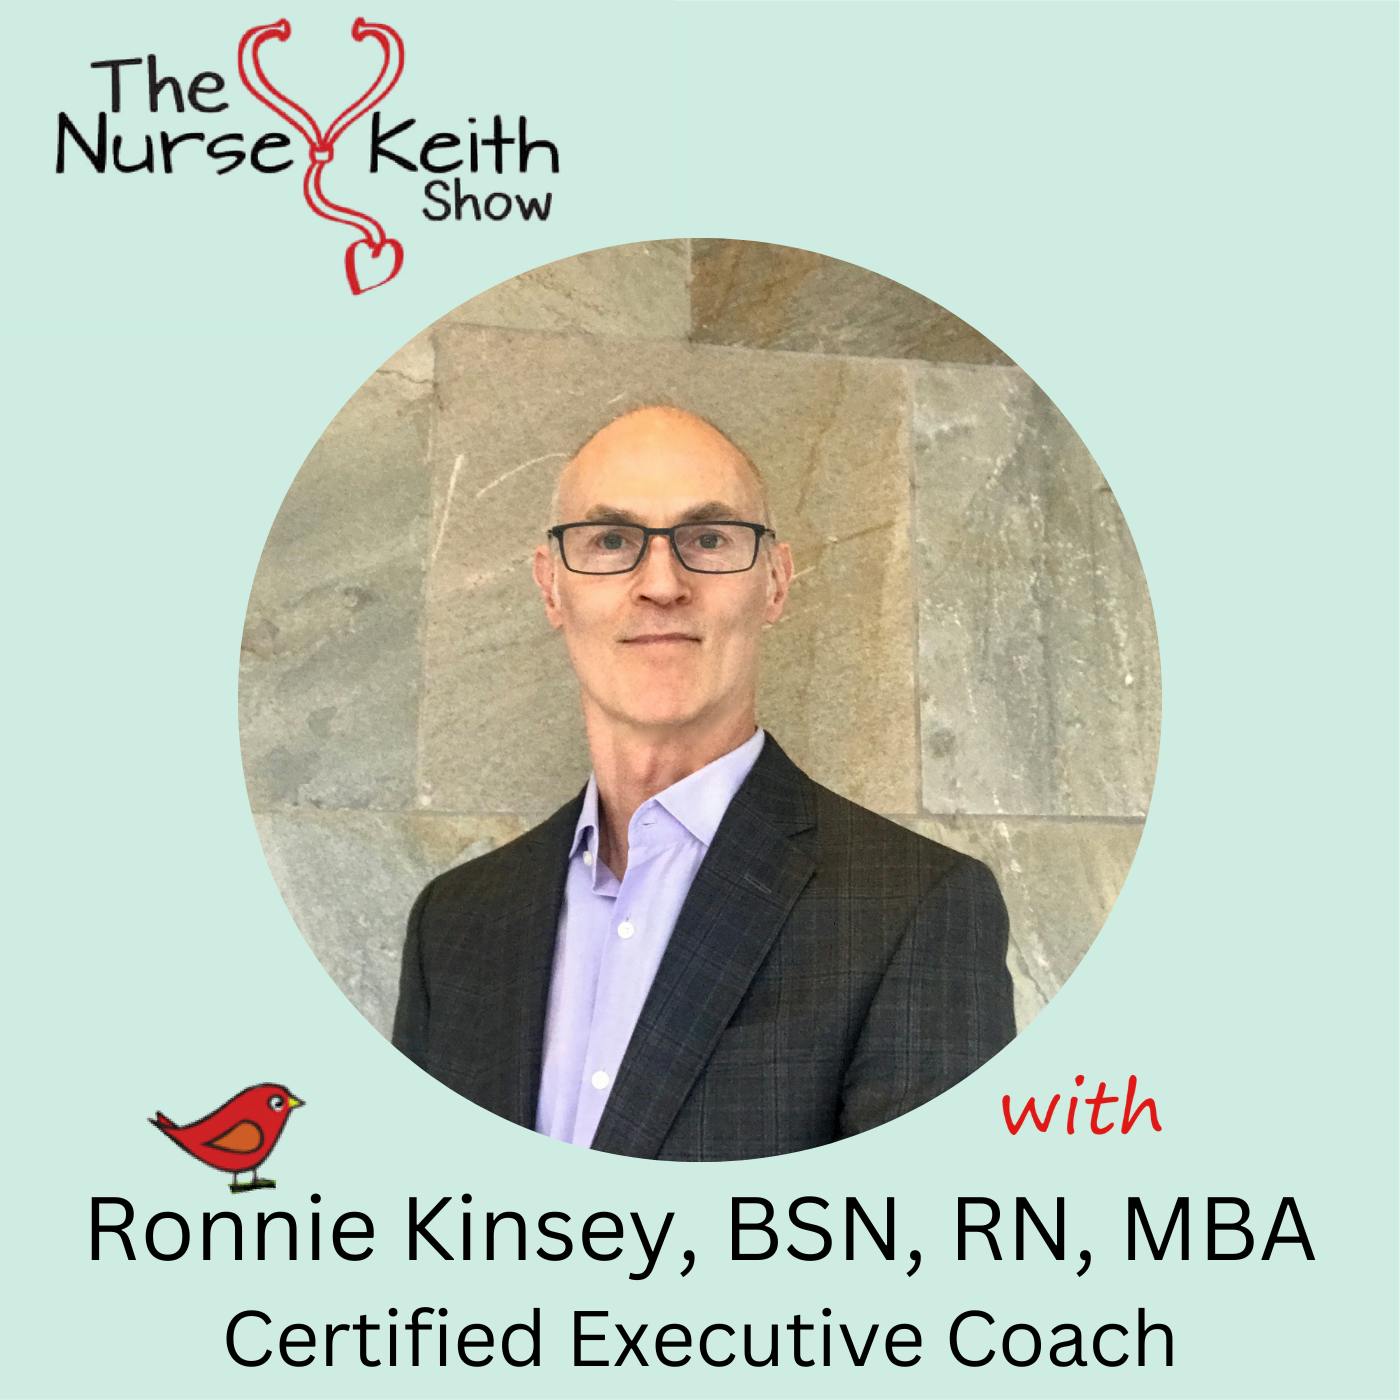 The Nurse Keith Show: How to Be a Visionary 21st-Century Healthcare Leader